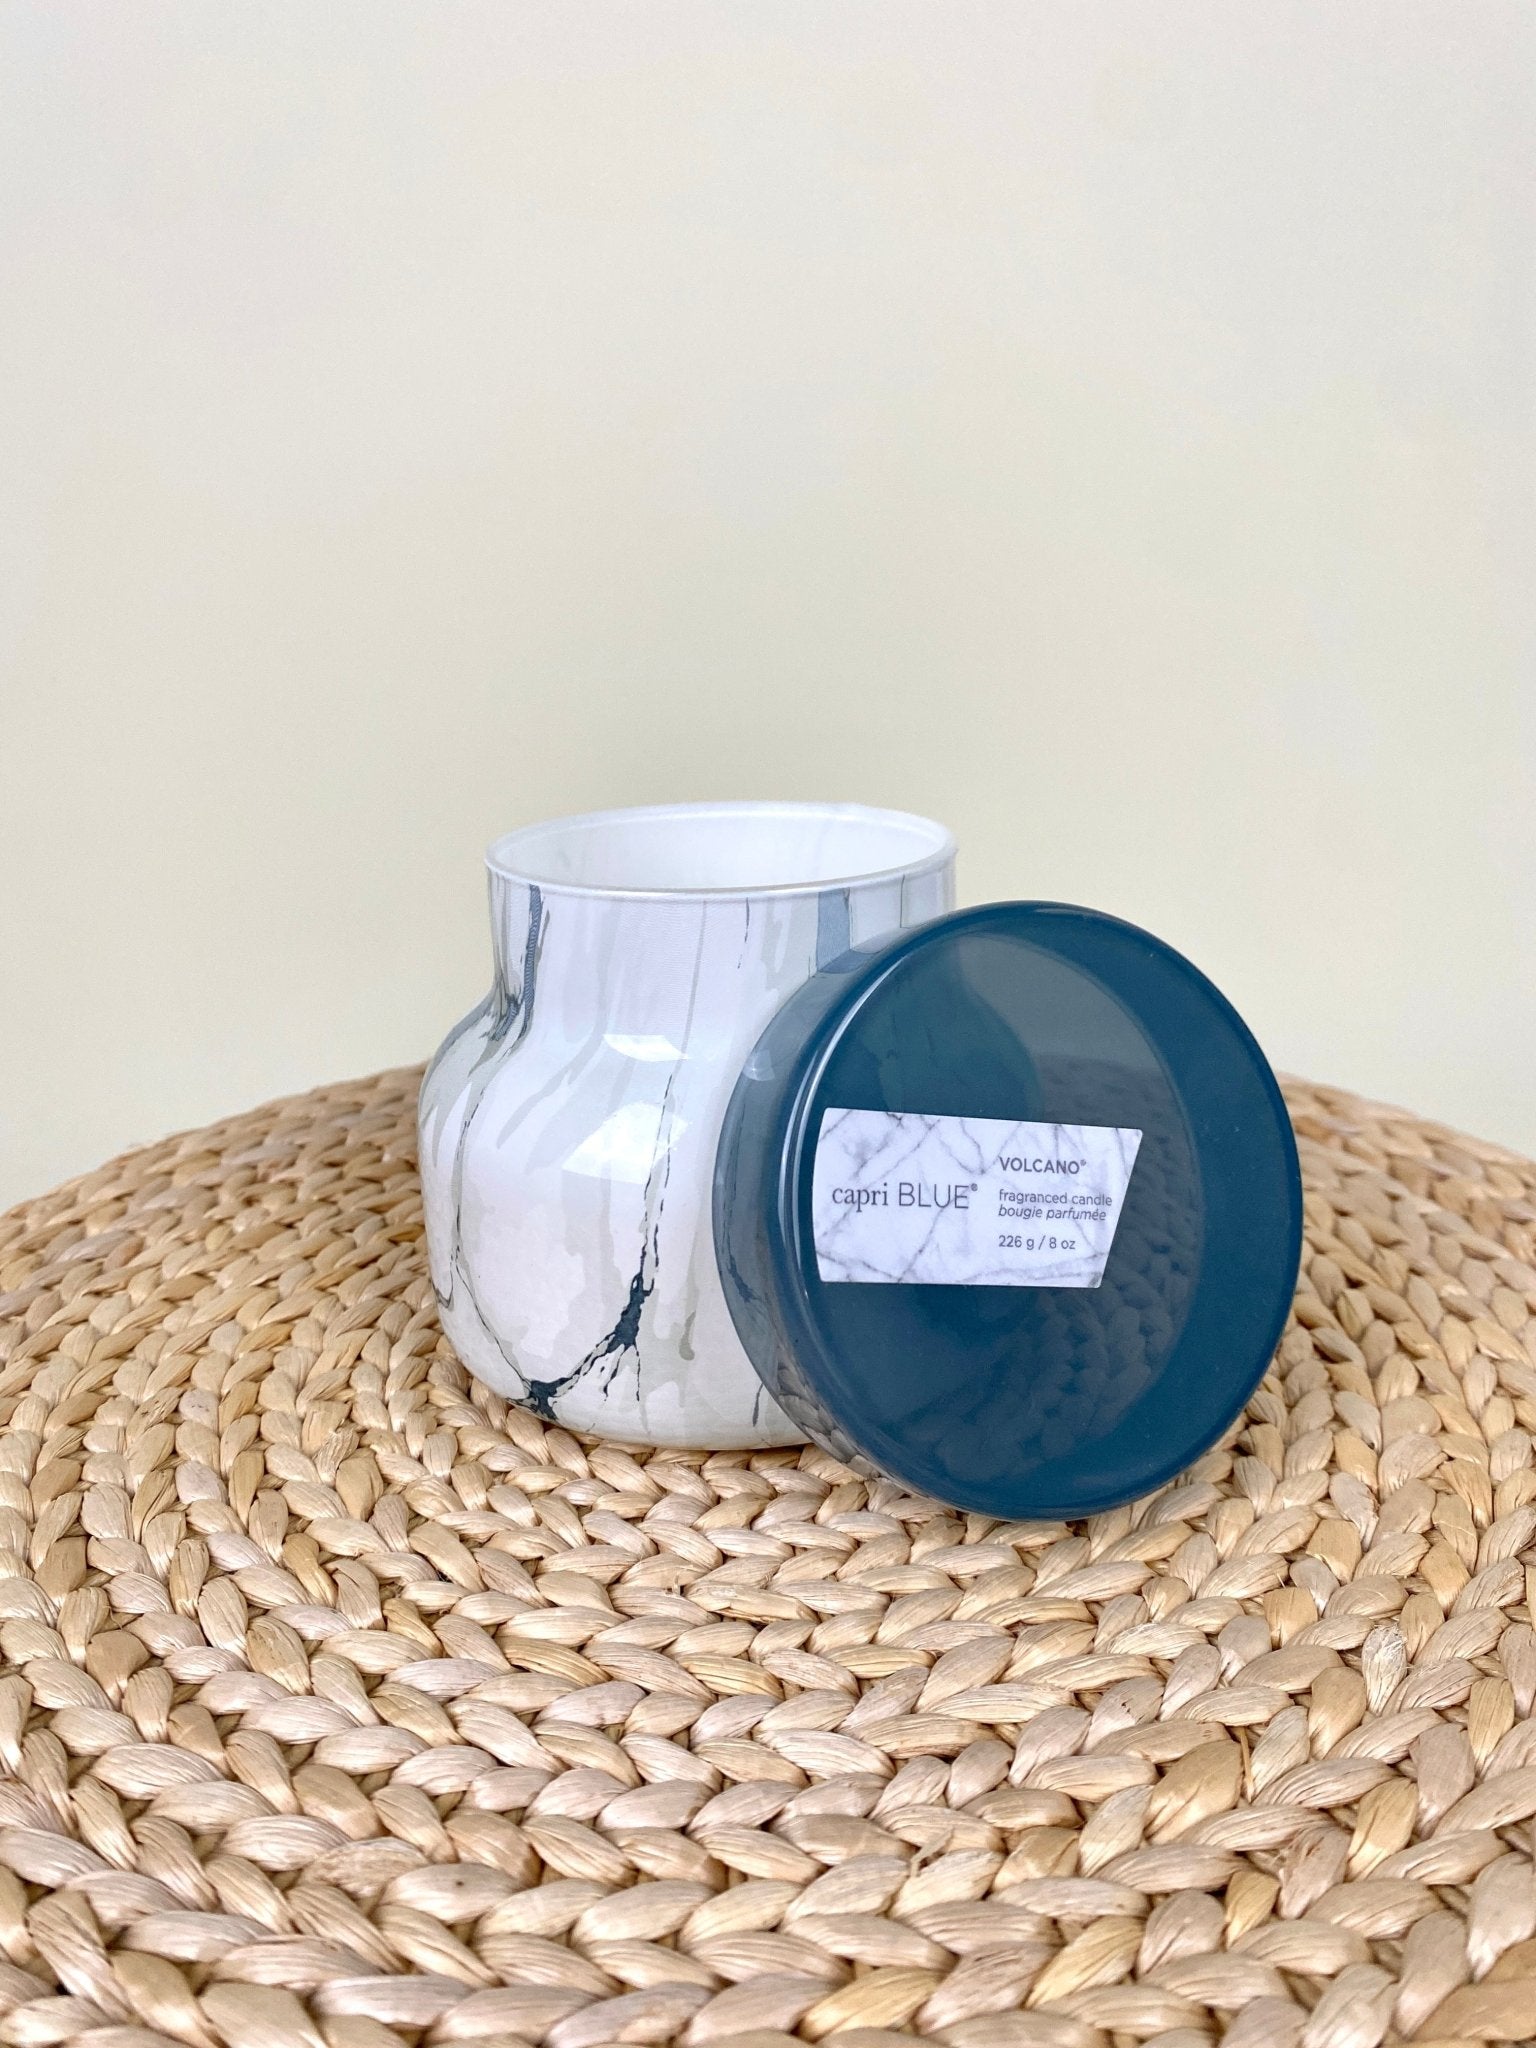 Capri Blue mod marble candle volcano 8oz - Trendy Candles and Scents at Lush Fashion Lounge Boutique in Oklahoma City